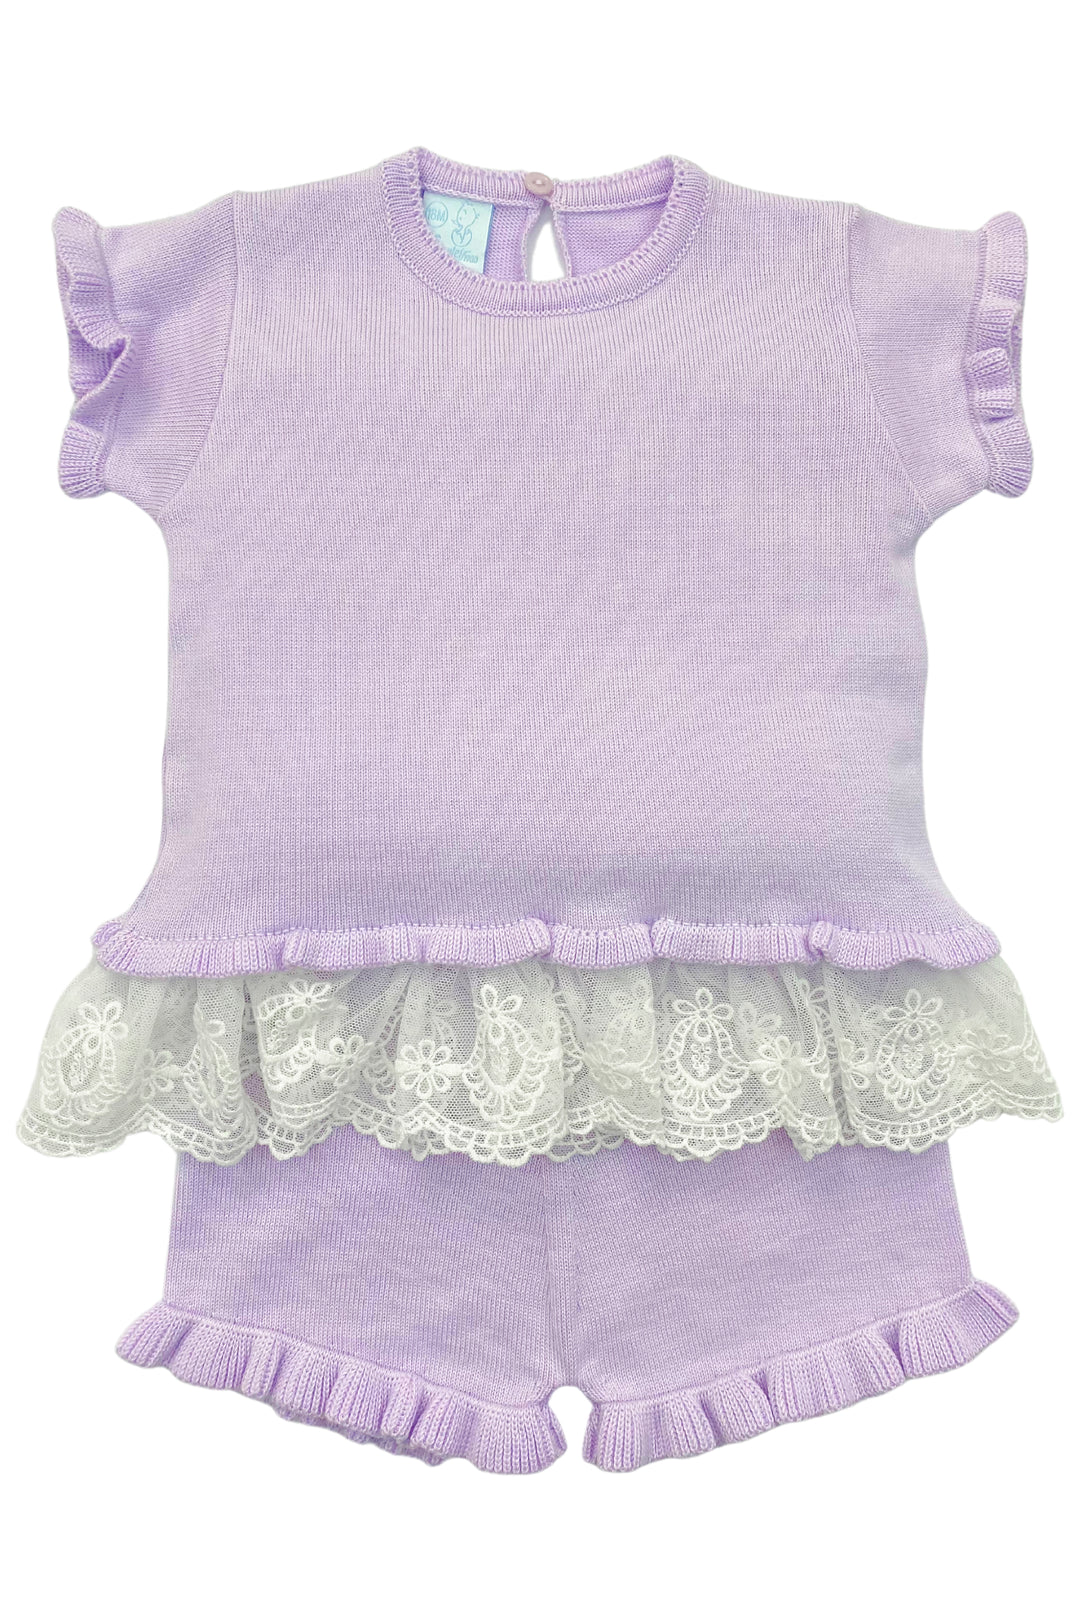 Granlei "Allegra" Lilac Lace Knit Top & Shorts | Millie and John